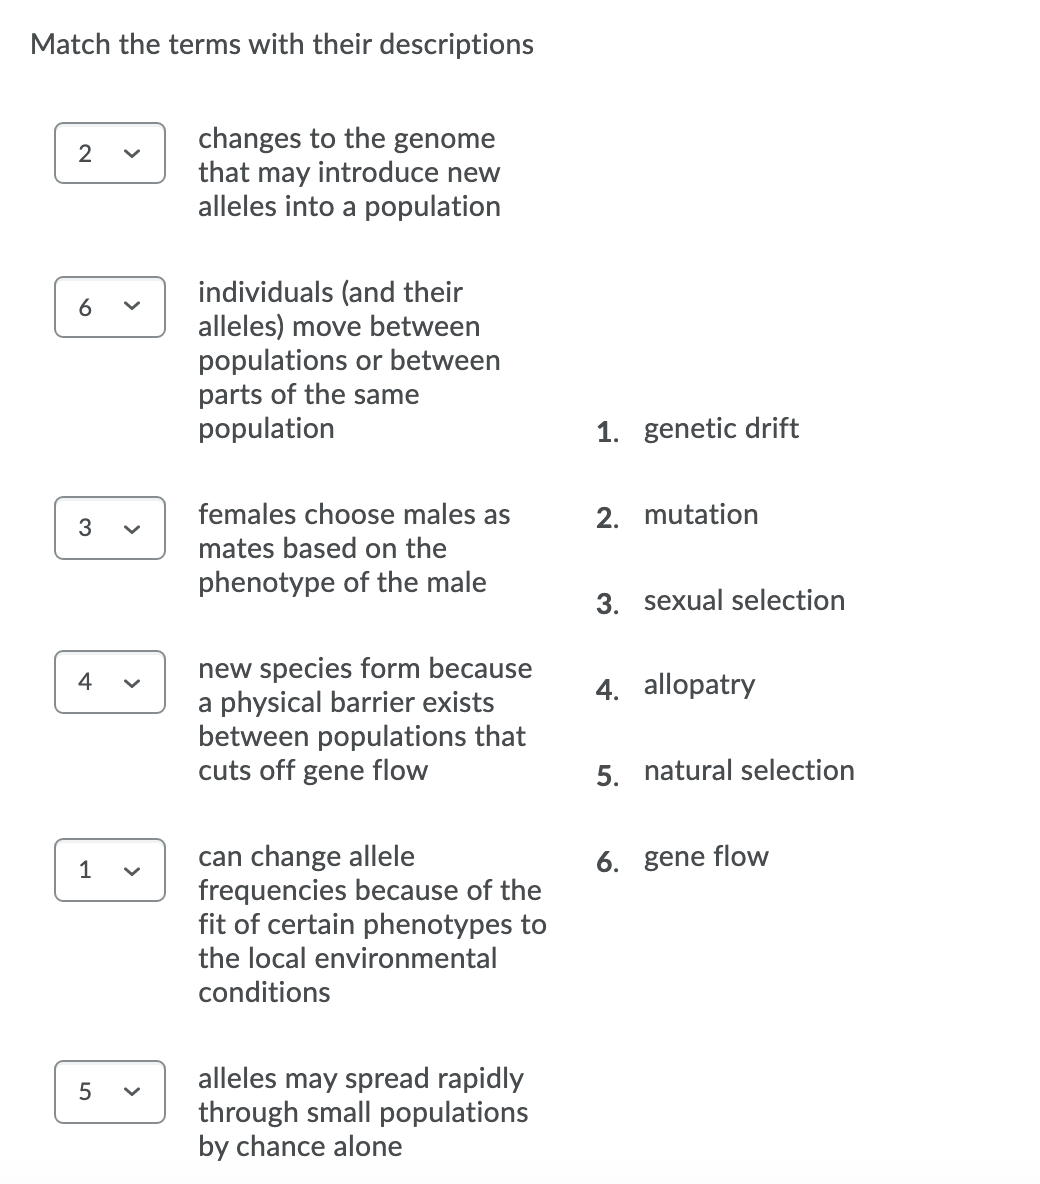 Match the terms with their descriptions
changes to the genome
that may introduce new
alleles into a population
2
individuals (and their
alleles) move between
populations or between
parts of the same
population
6
1. genetic drift
females choose males as
2. mutation
3
mates based on the
phenotype of the male
3. sexual selection
new species form because
a physical barrier exists
between populations that
cuts off gene flow
4
4. allopatry
5. natural selection
can change allele
frequencies because of the
fit of certain phenotypes to
1
6. gene flow
the local environmental
conditions
alleles may spread rapidly
through small populations
by chance alone
